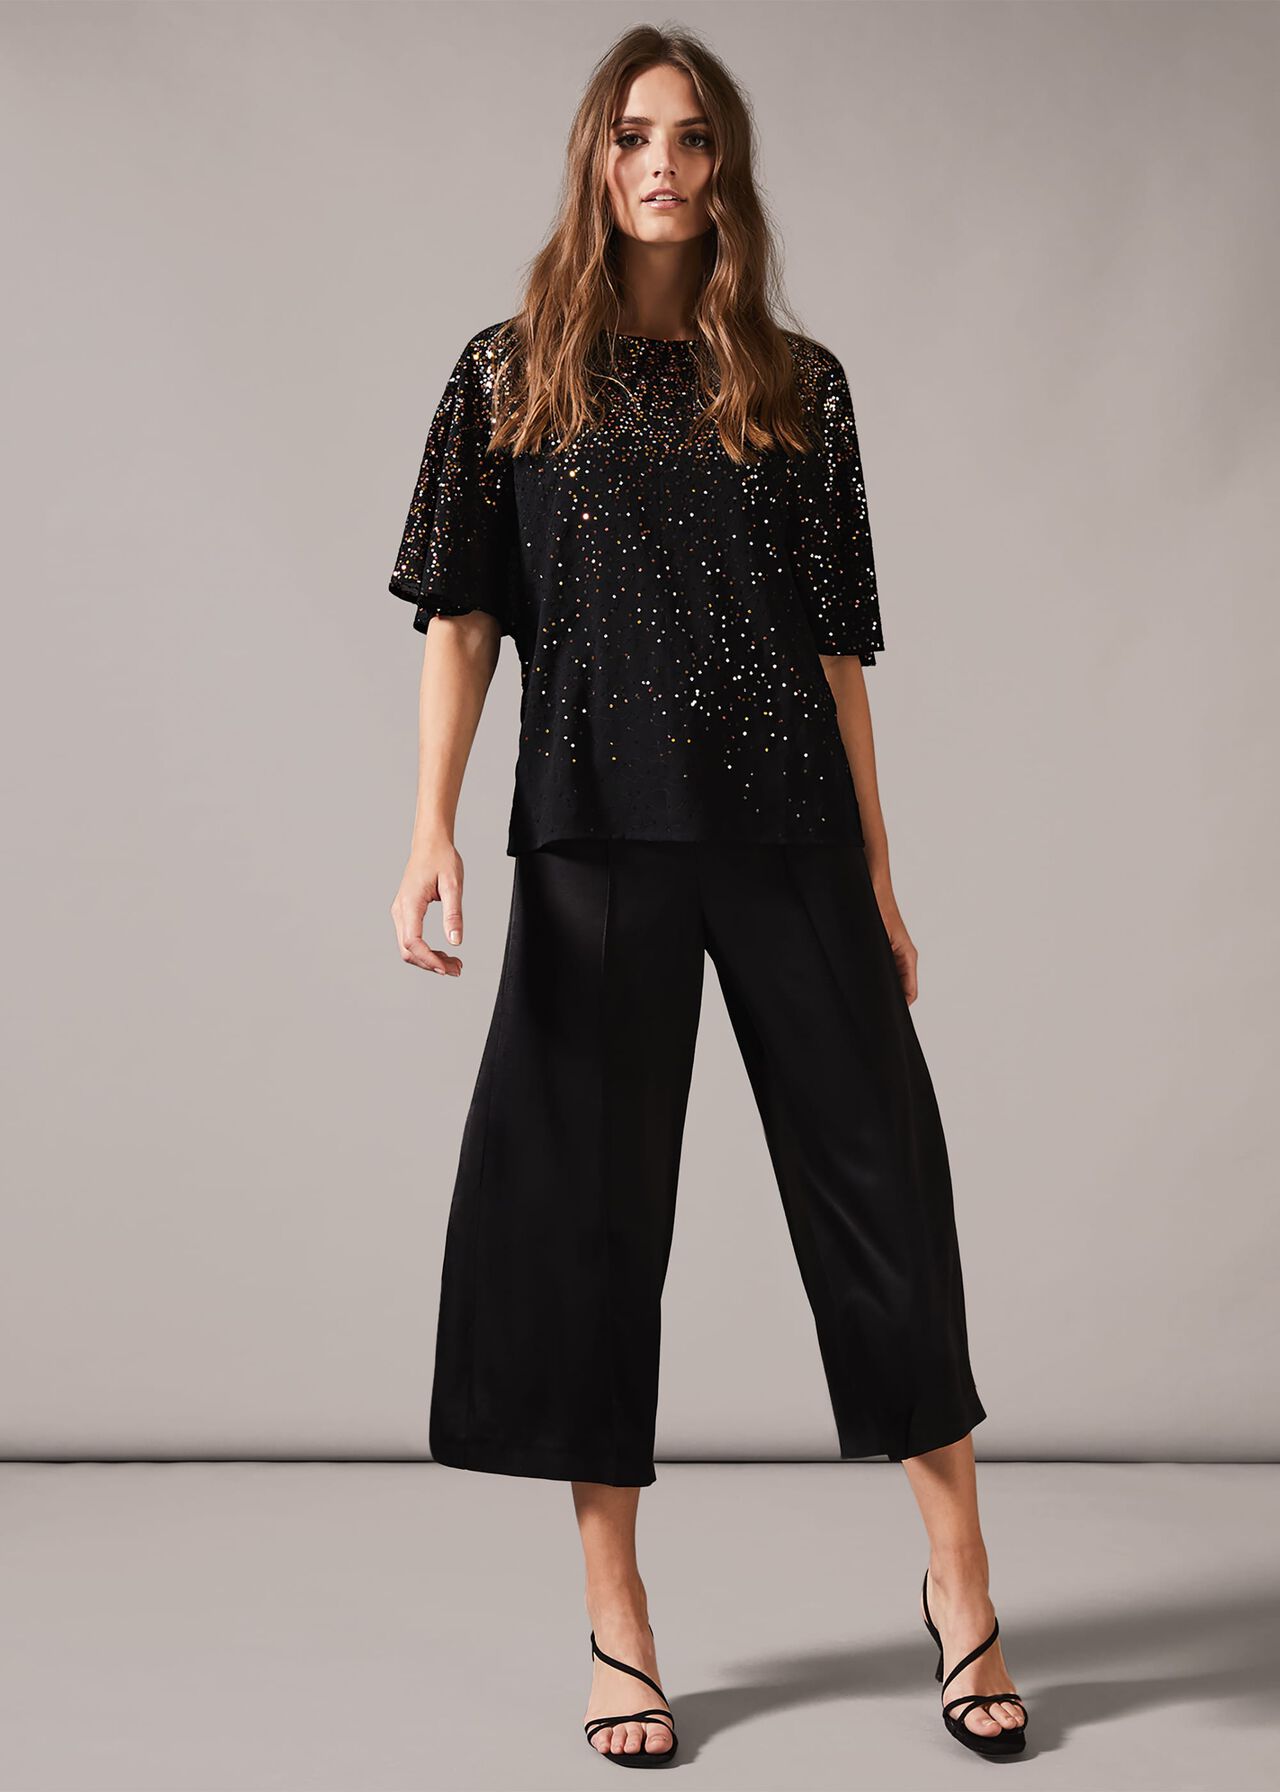 Graduated Sequin Sparkle Blouse | Phase Eight | Phase Eight